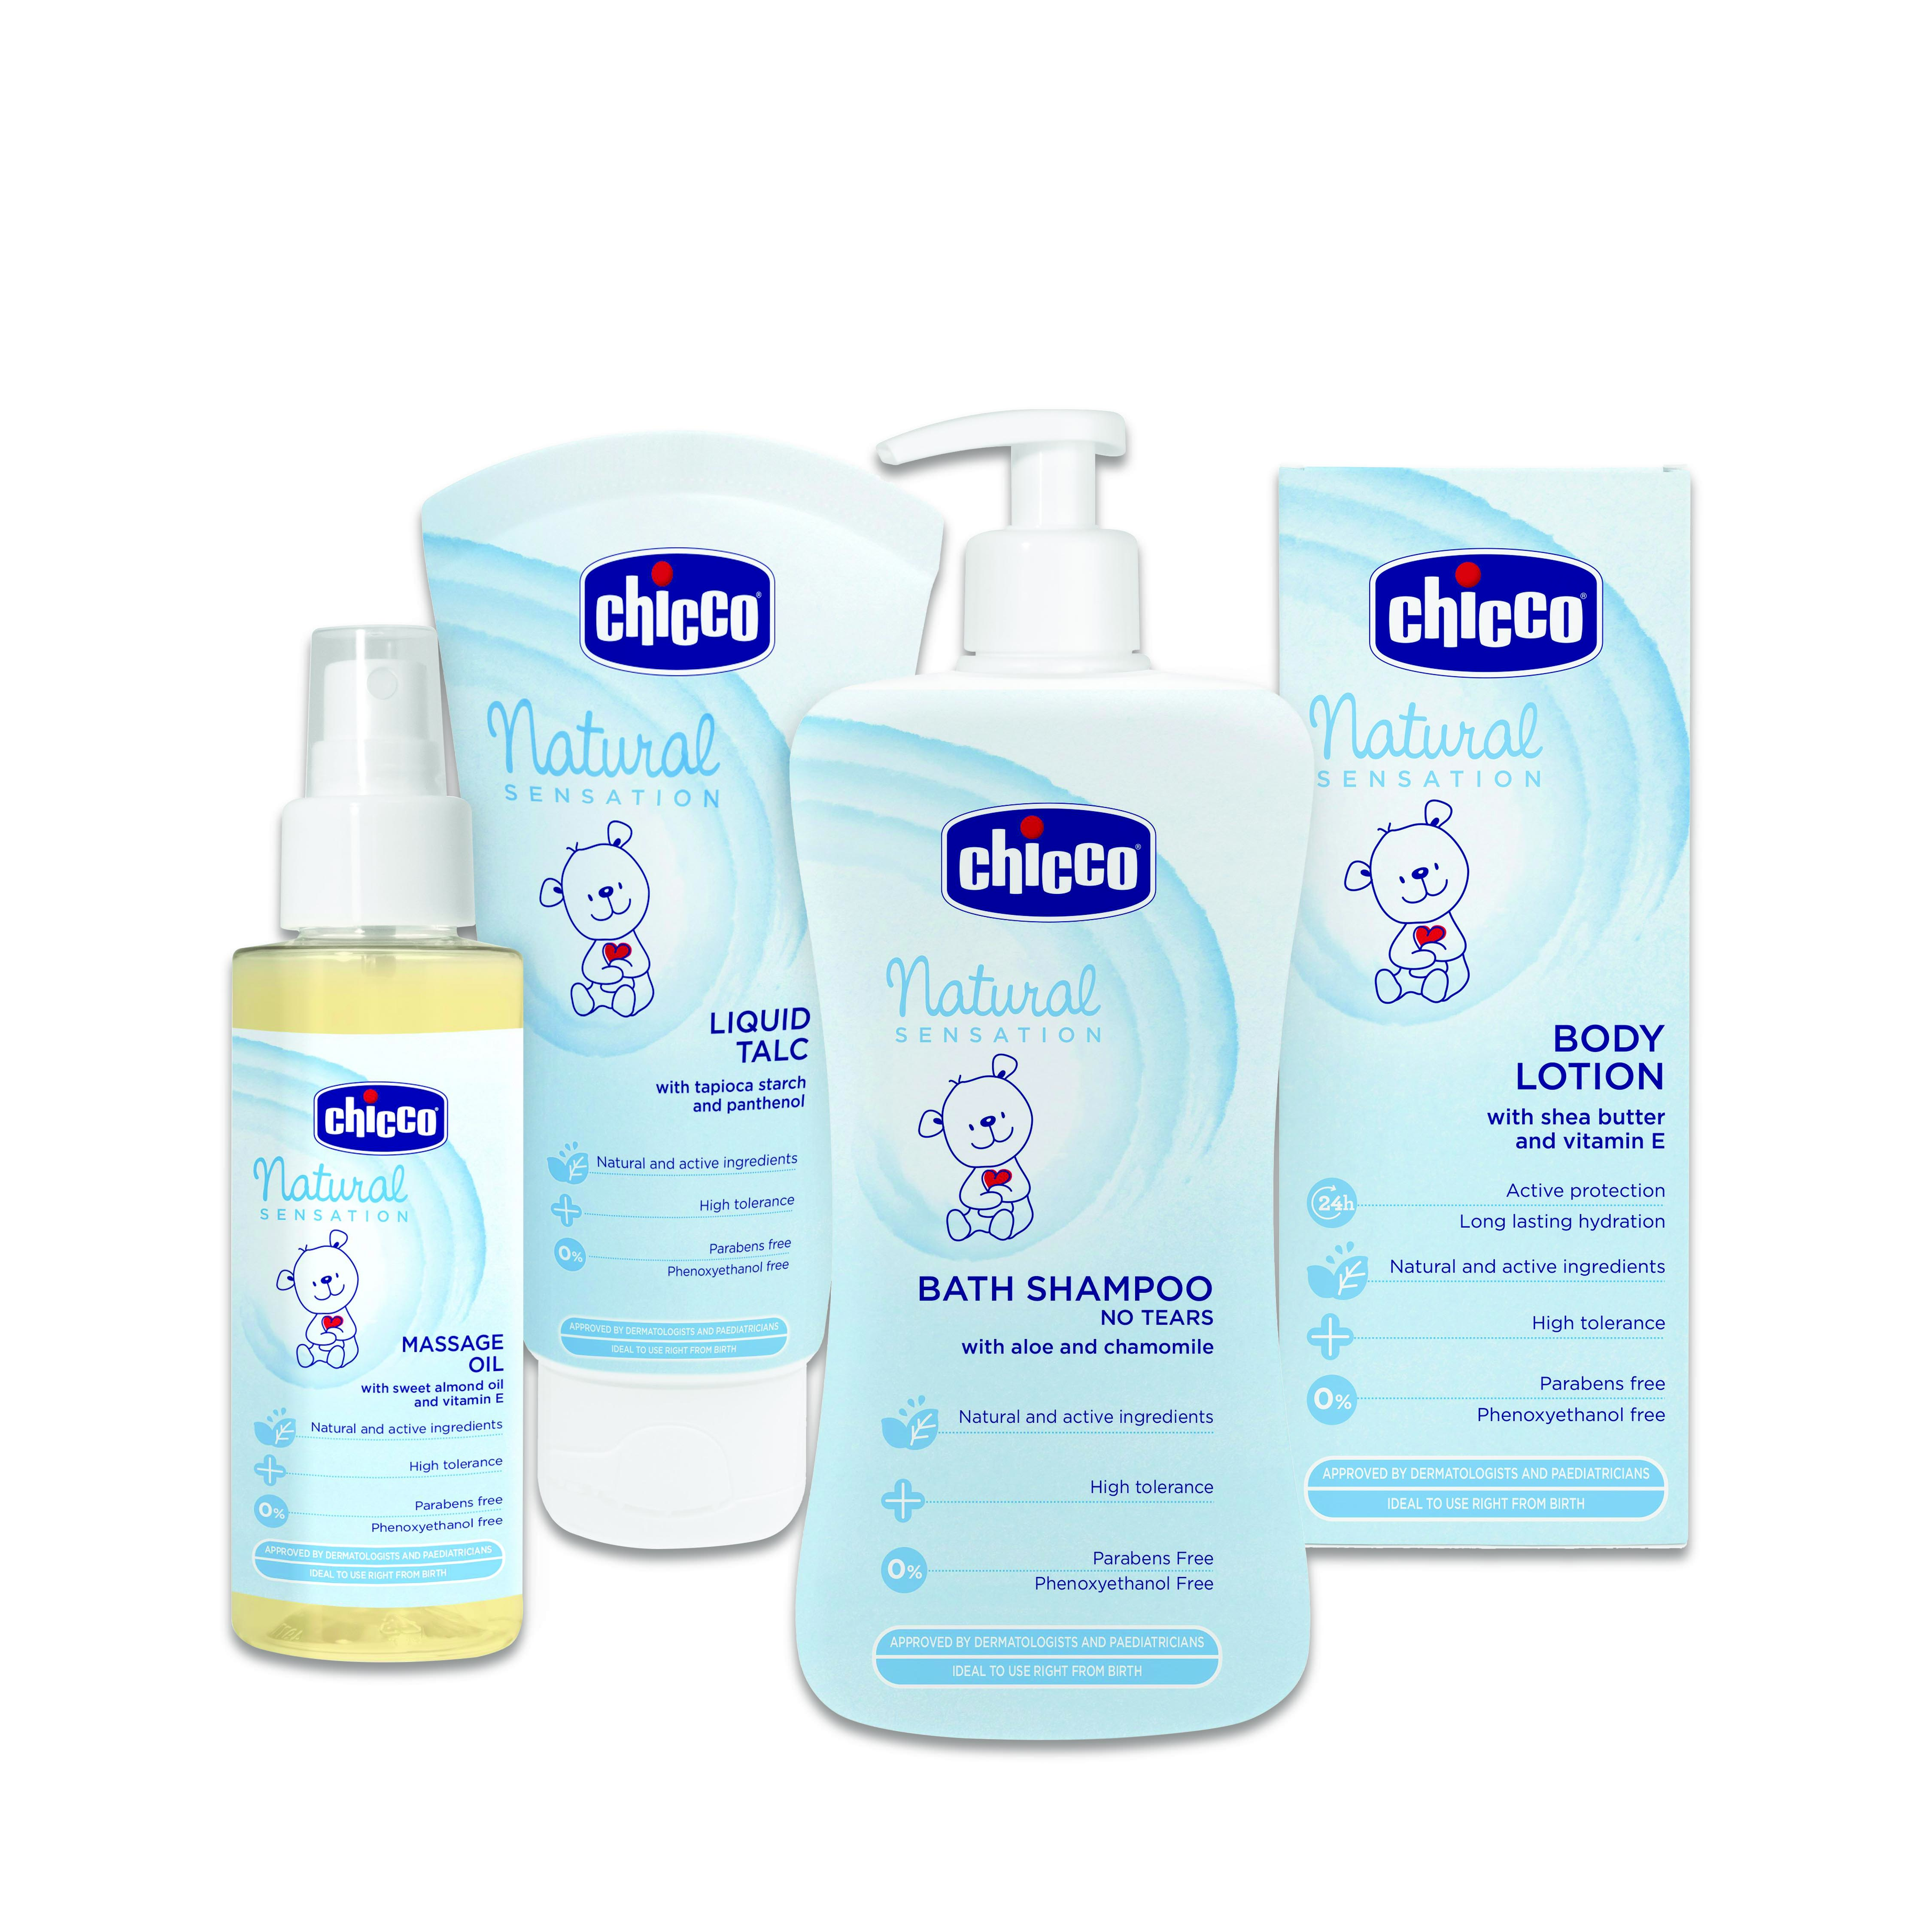 chicco baby lotion price